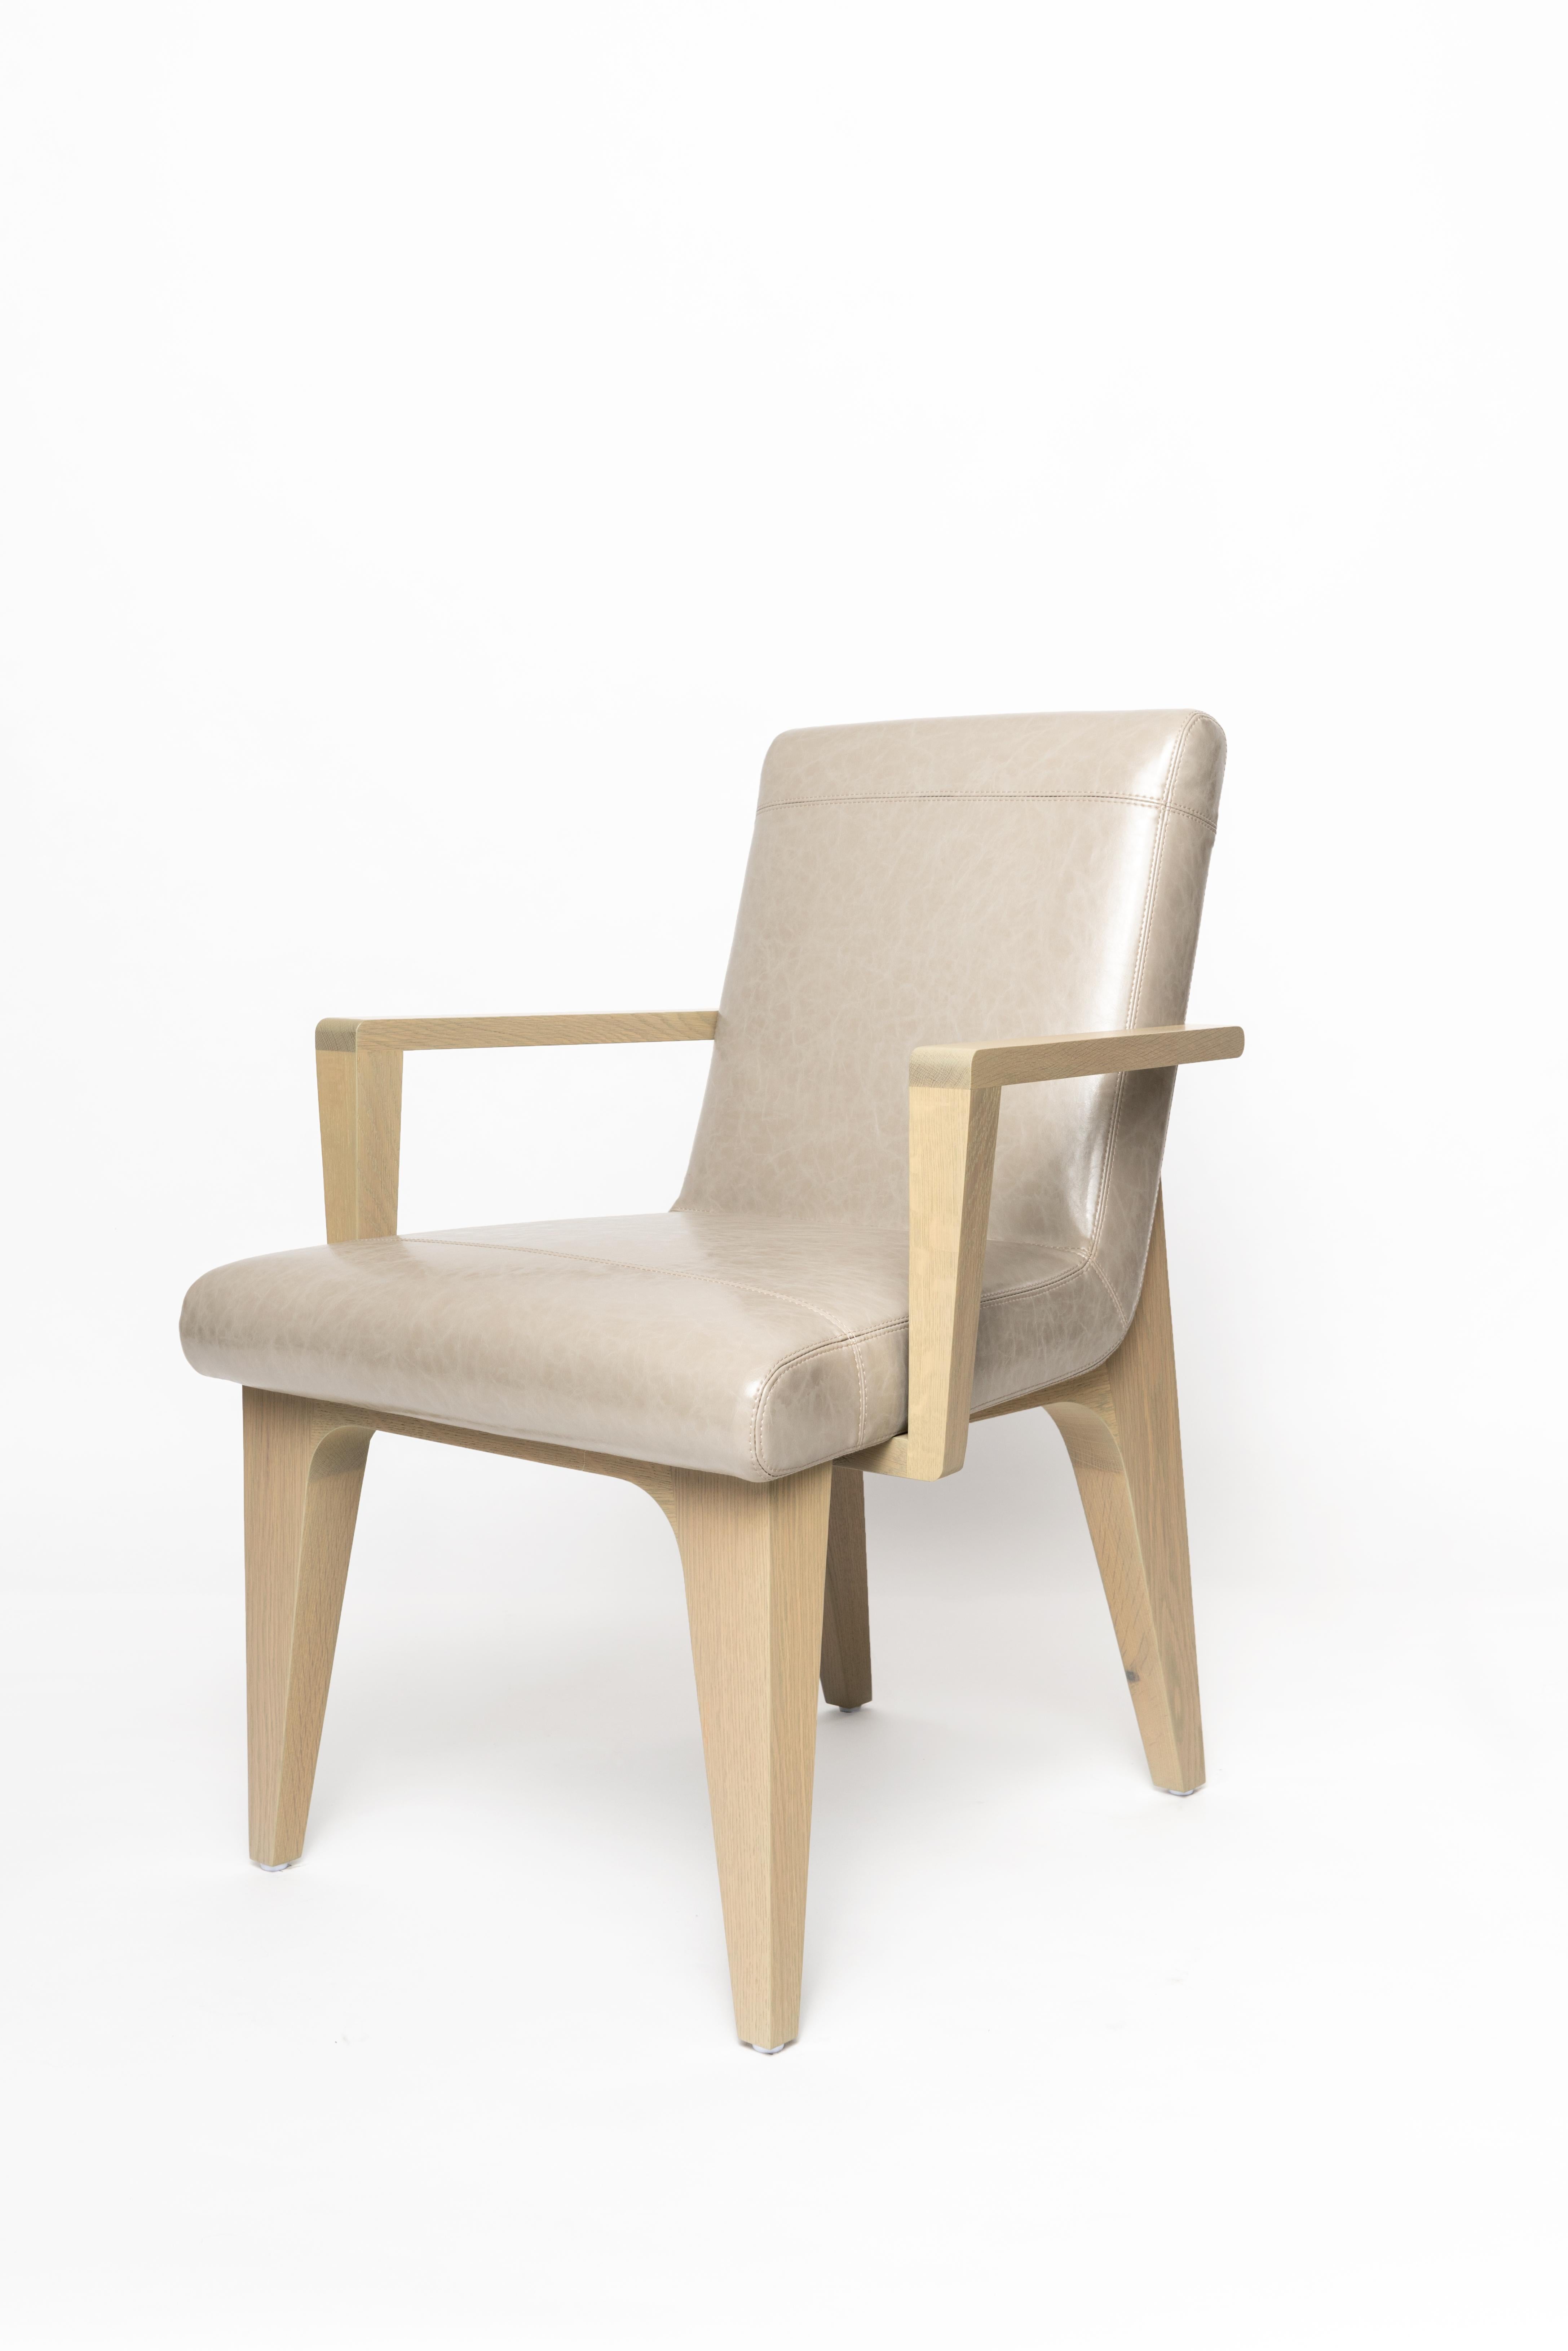 The LUMA design workshop Silo armchair is the result of thoughtful design and expert craftsmanship. LUMA tan faux leather, stone oak, and nickel, come together elegantly to create a comfortable, modern dining chair. The metal detailing and unique